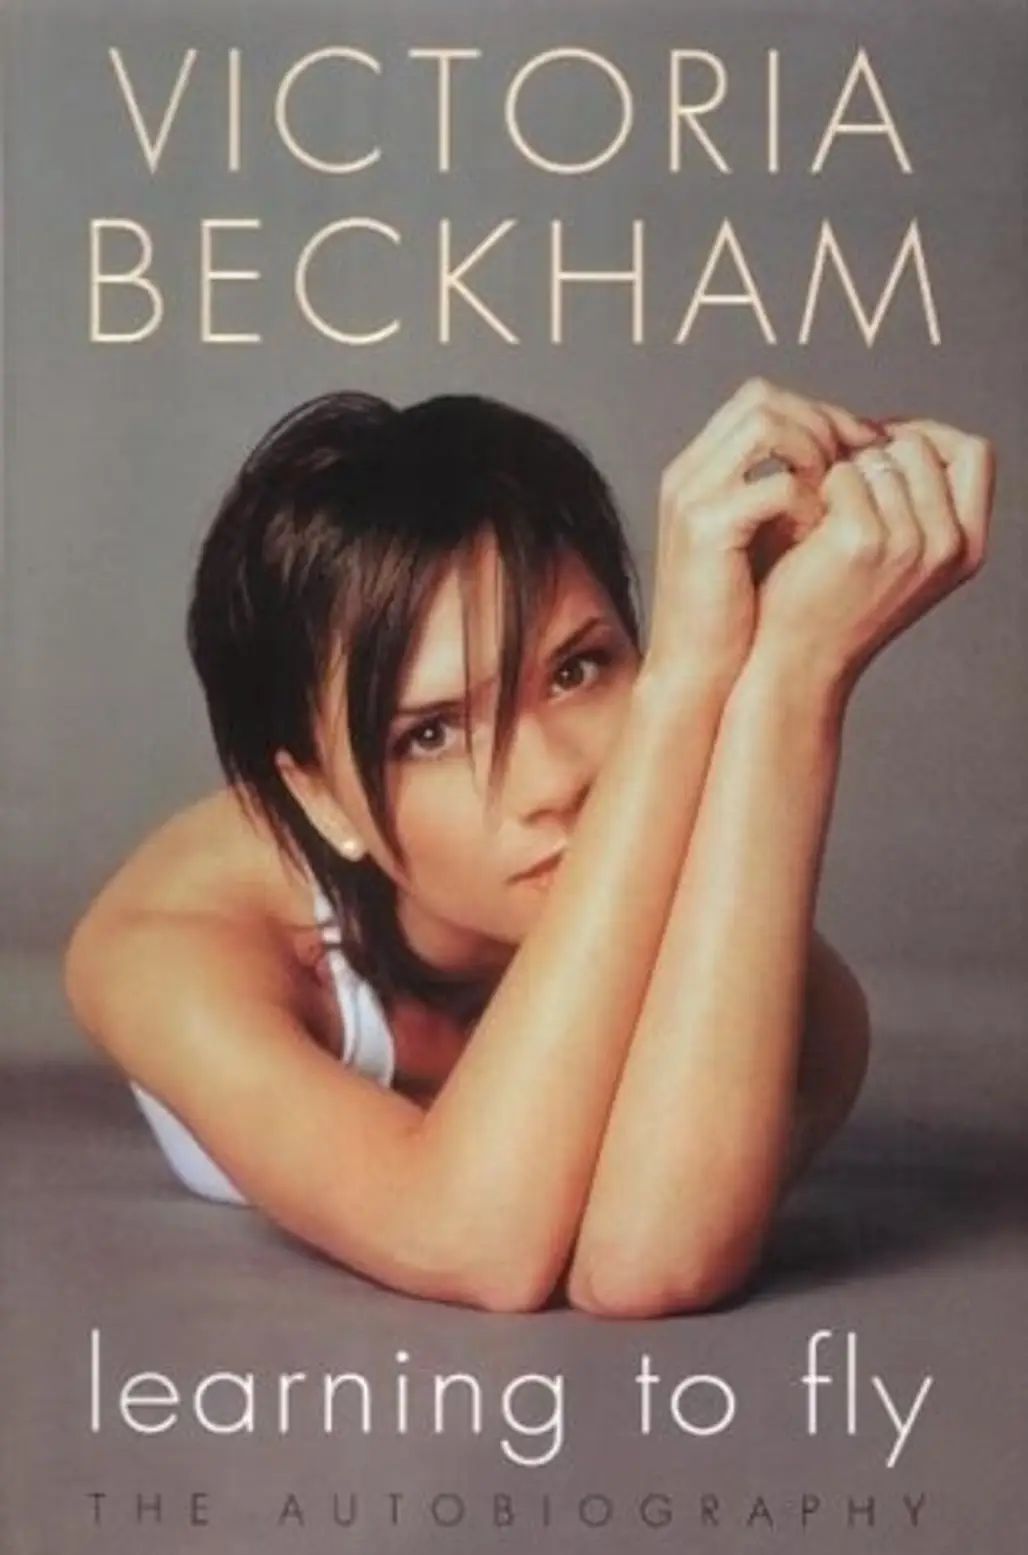 Victoria Beckham’s ‘Learning to Fly’